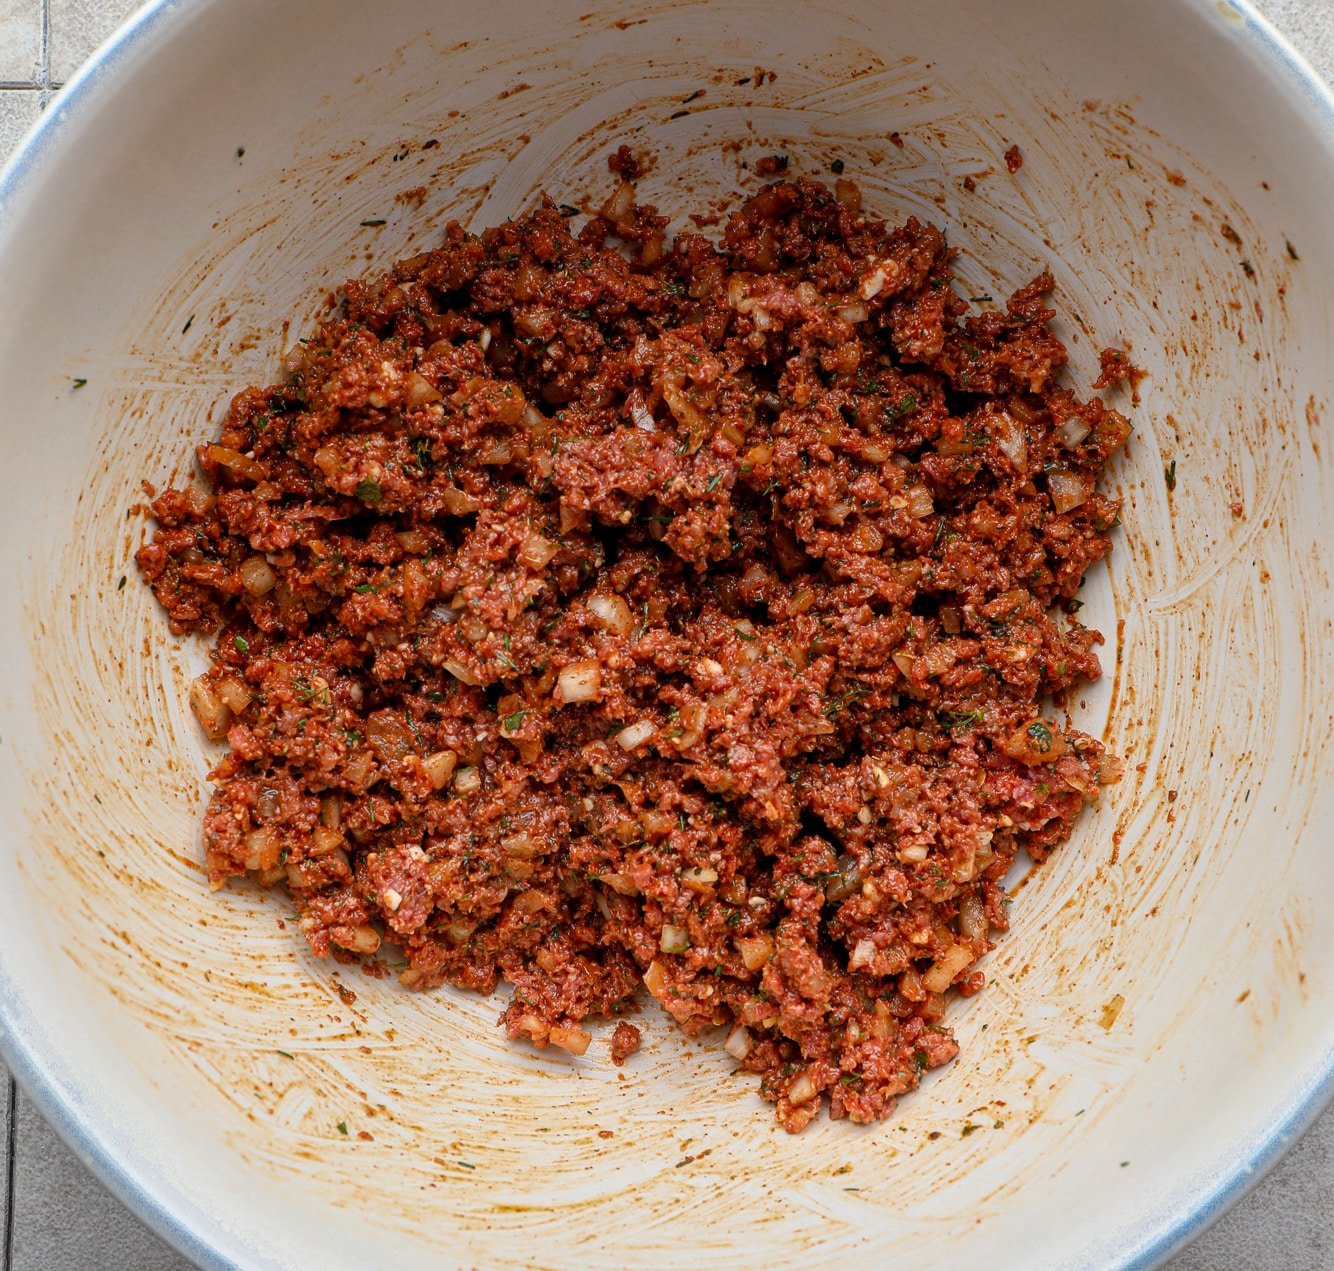 a spiced ground vegan meat mixture in a large white bowl.